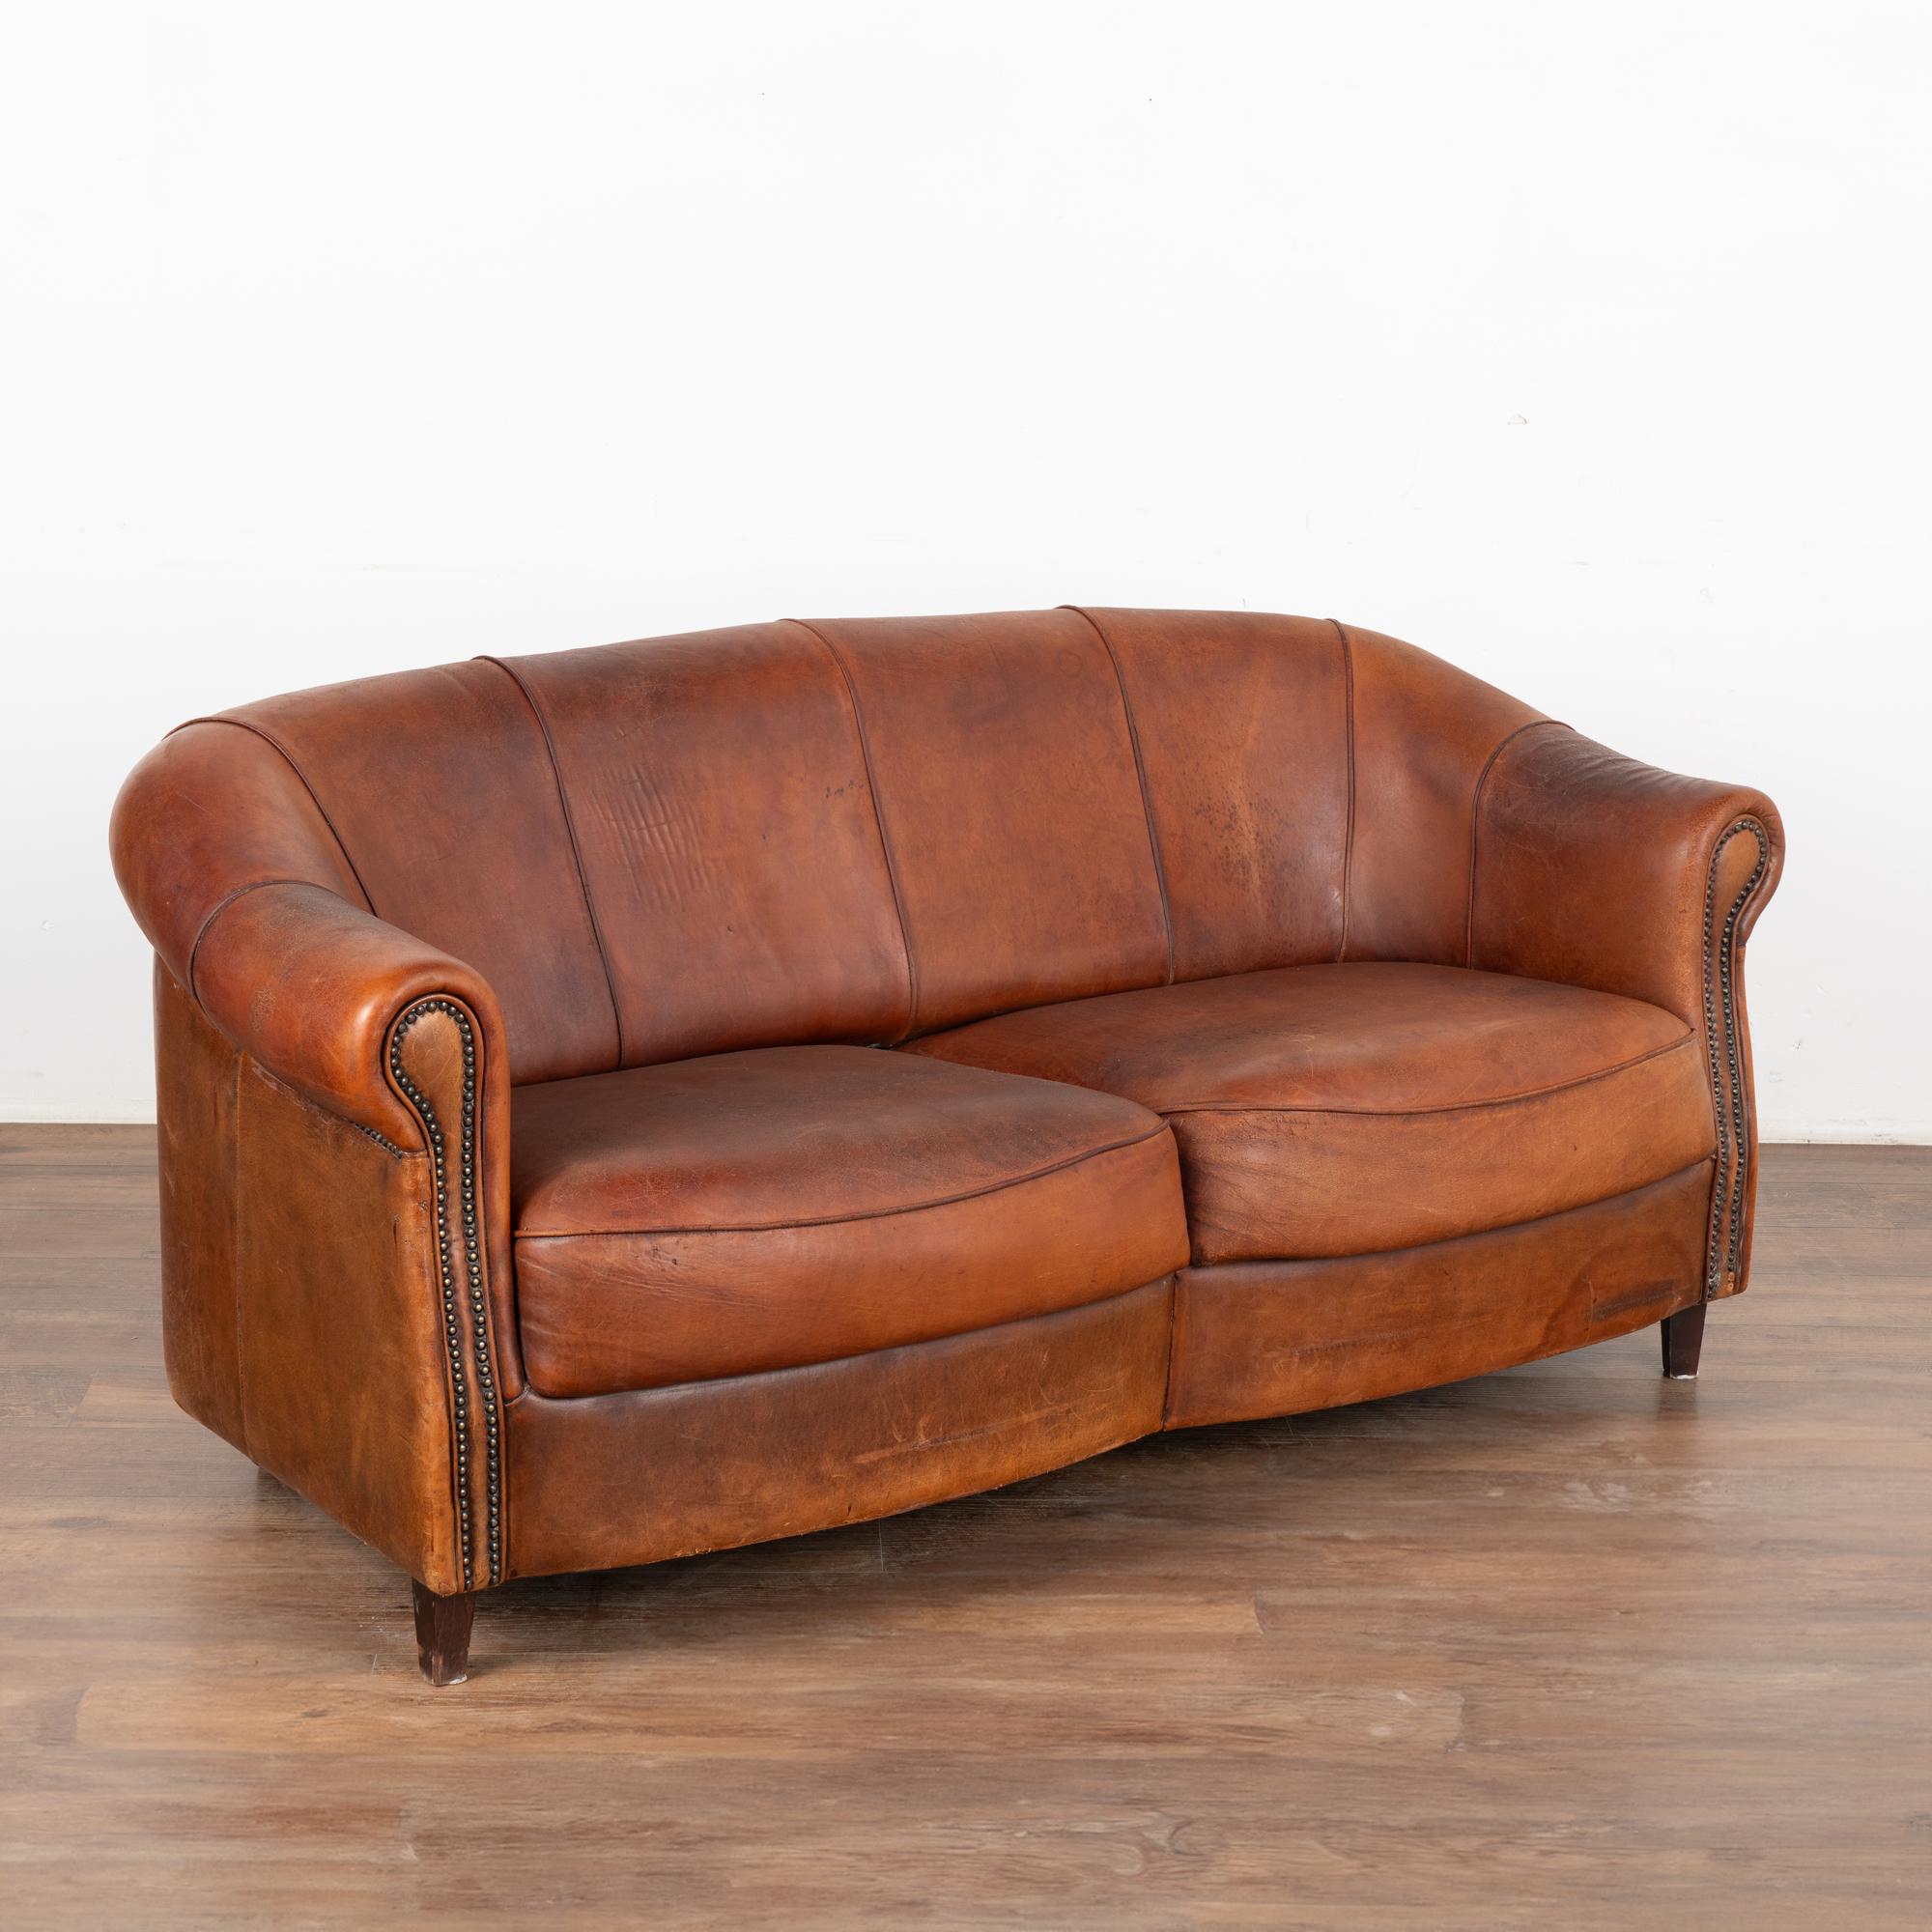 Vintage leather has an appeal all its own, especially when worn and weathered as seen in this handsome two-seat sofa. The aged patina of the brown sheep's skin leather leather has deepened through generations of use.
The gently rolled arms have